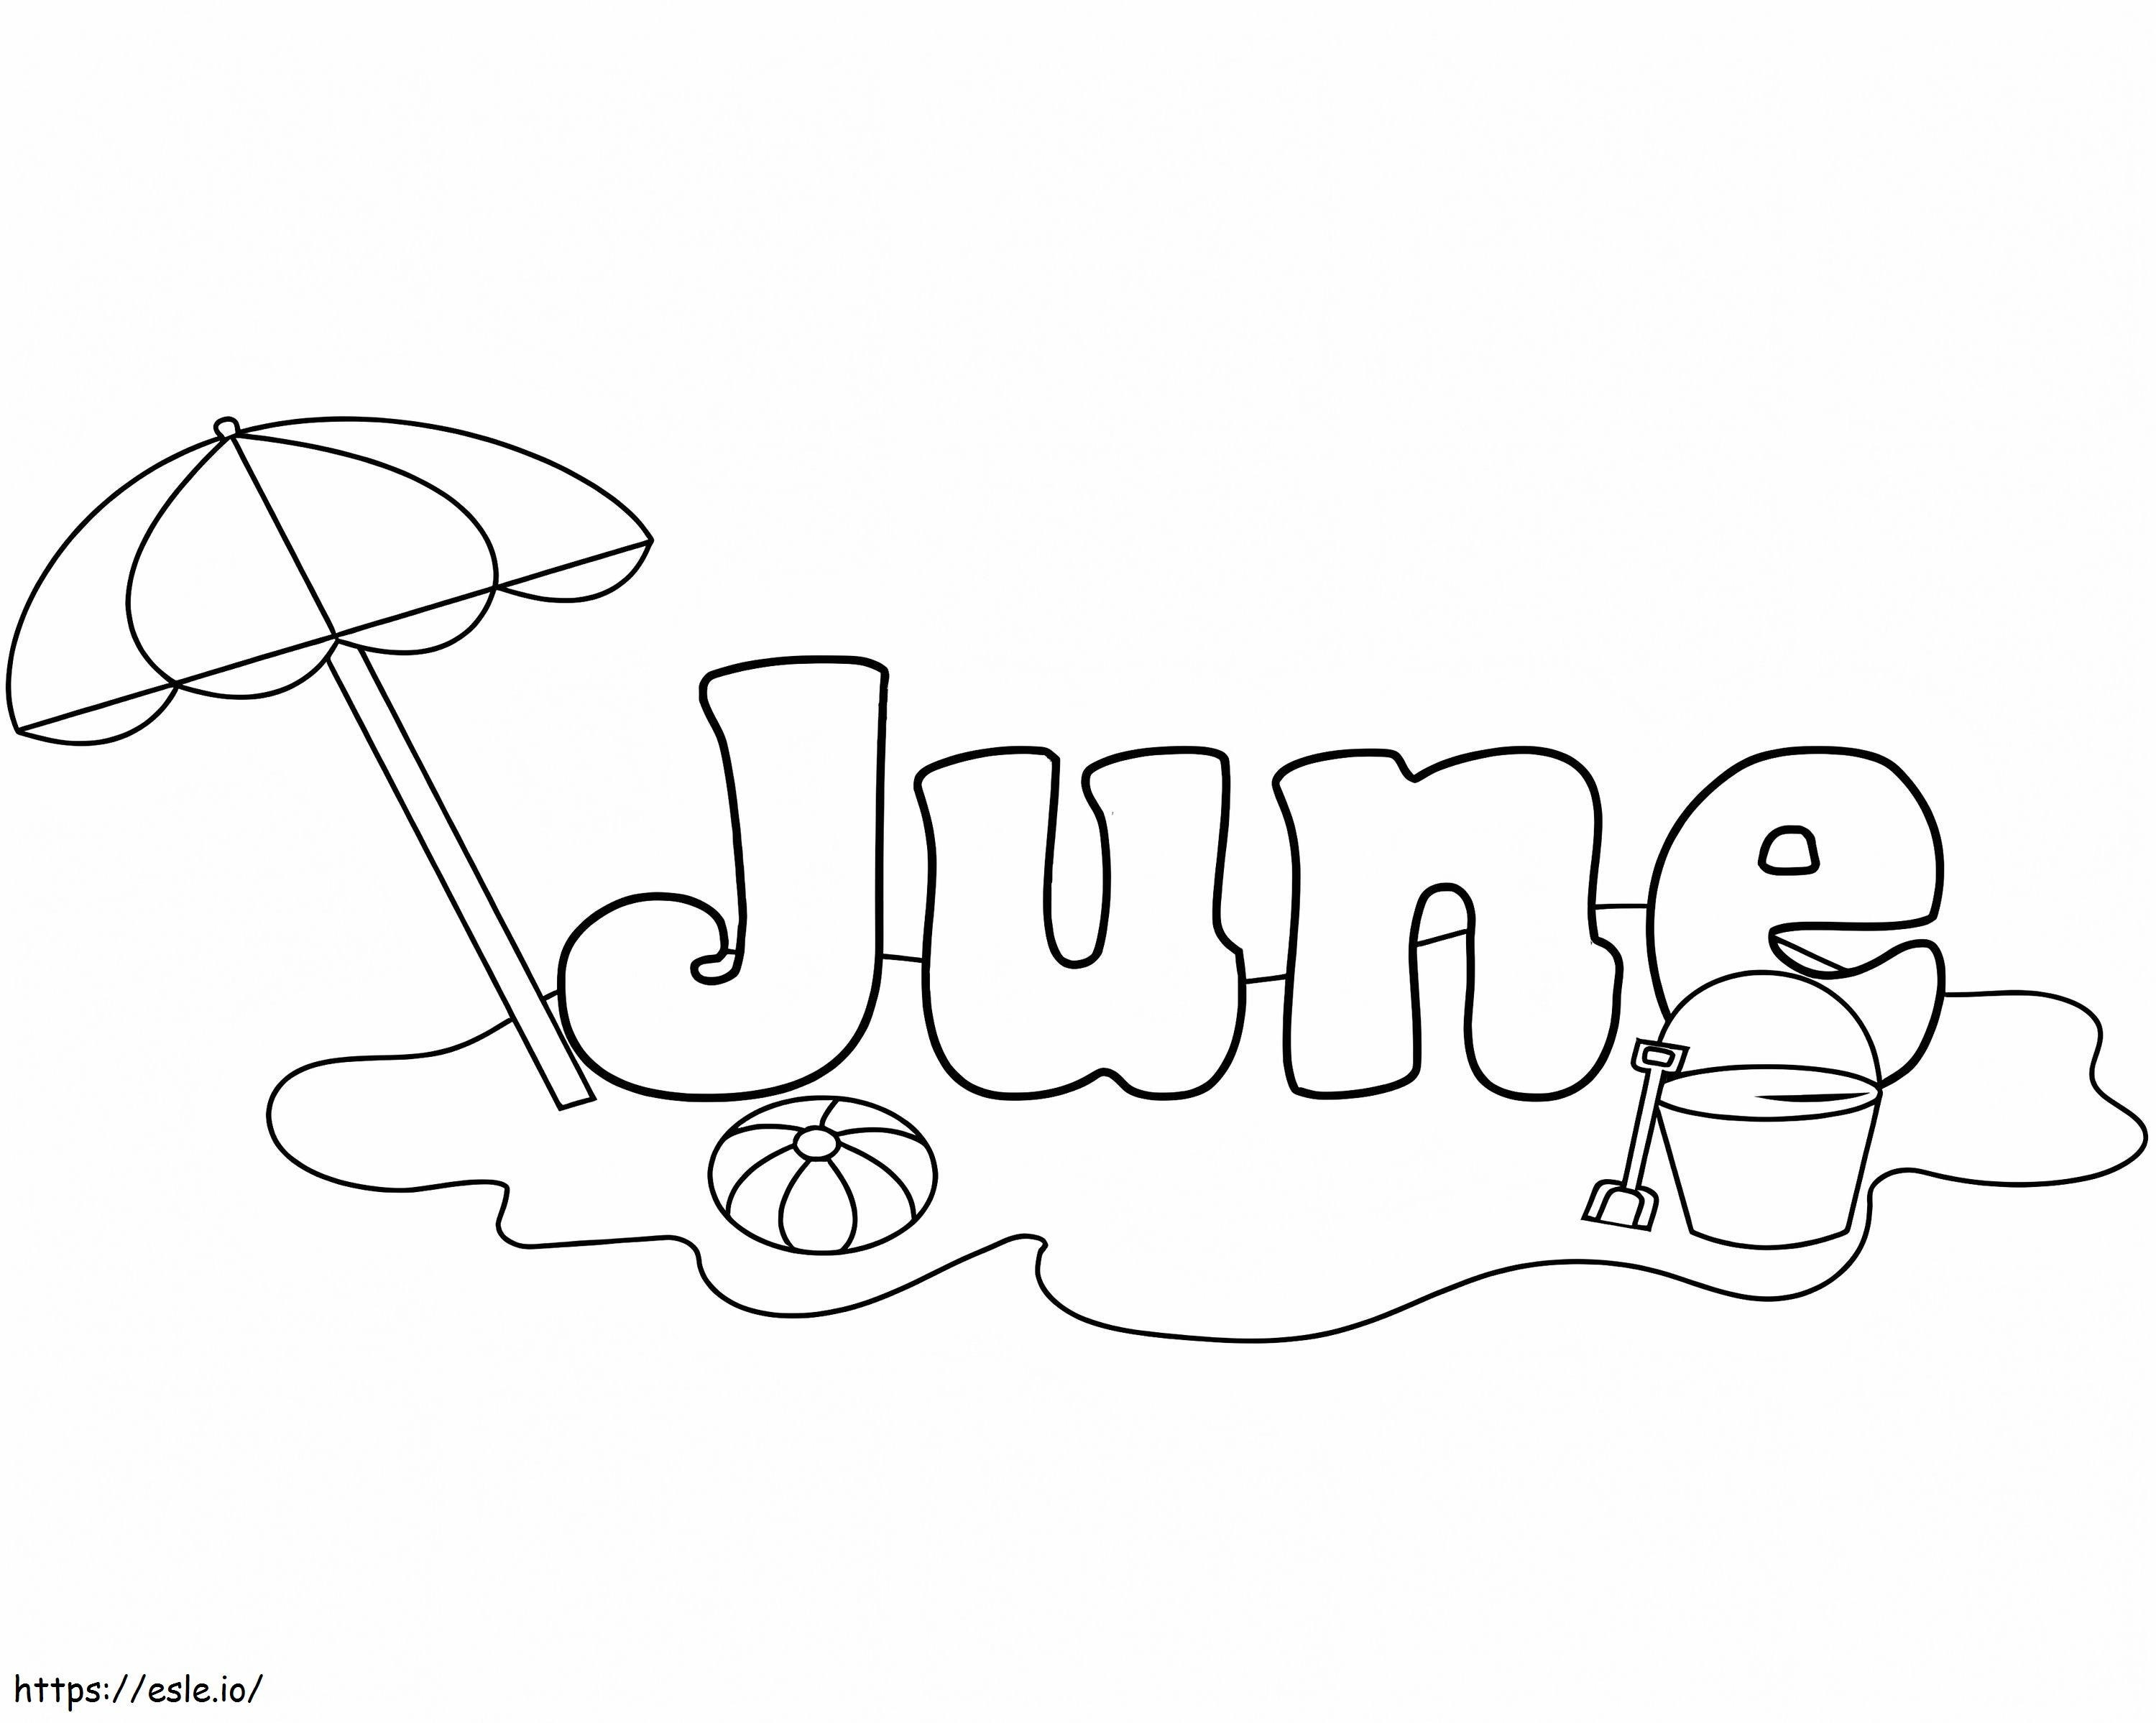 June With Beach coloring page